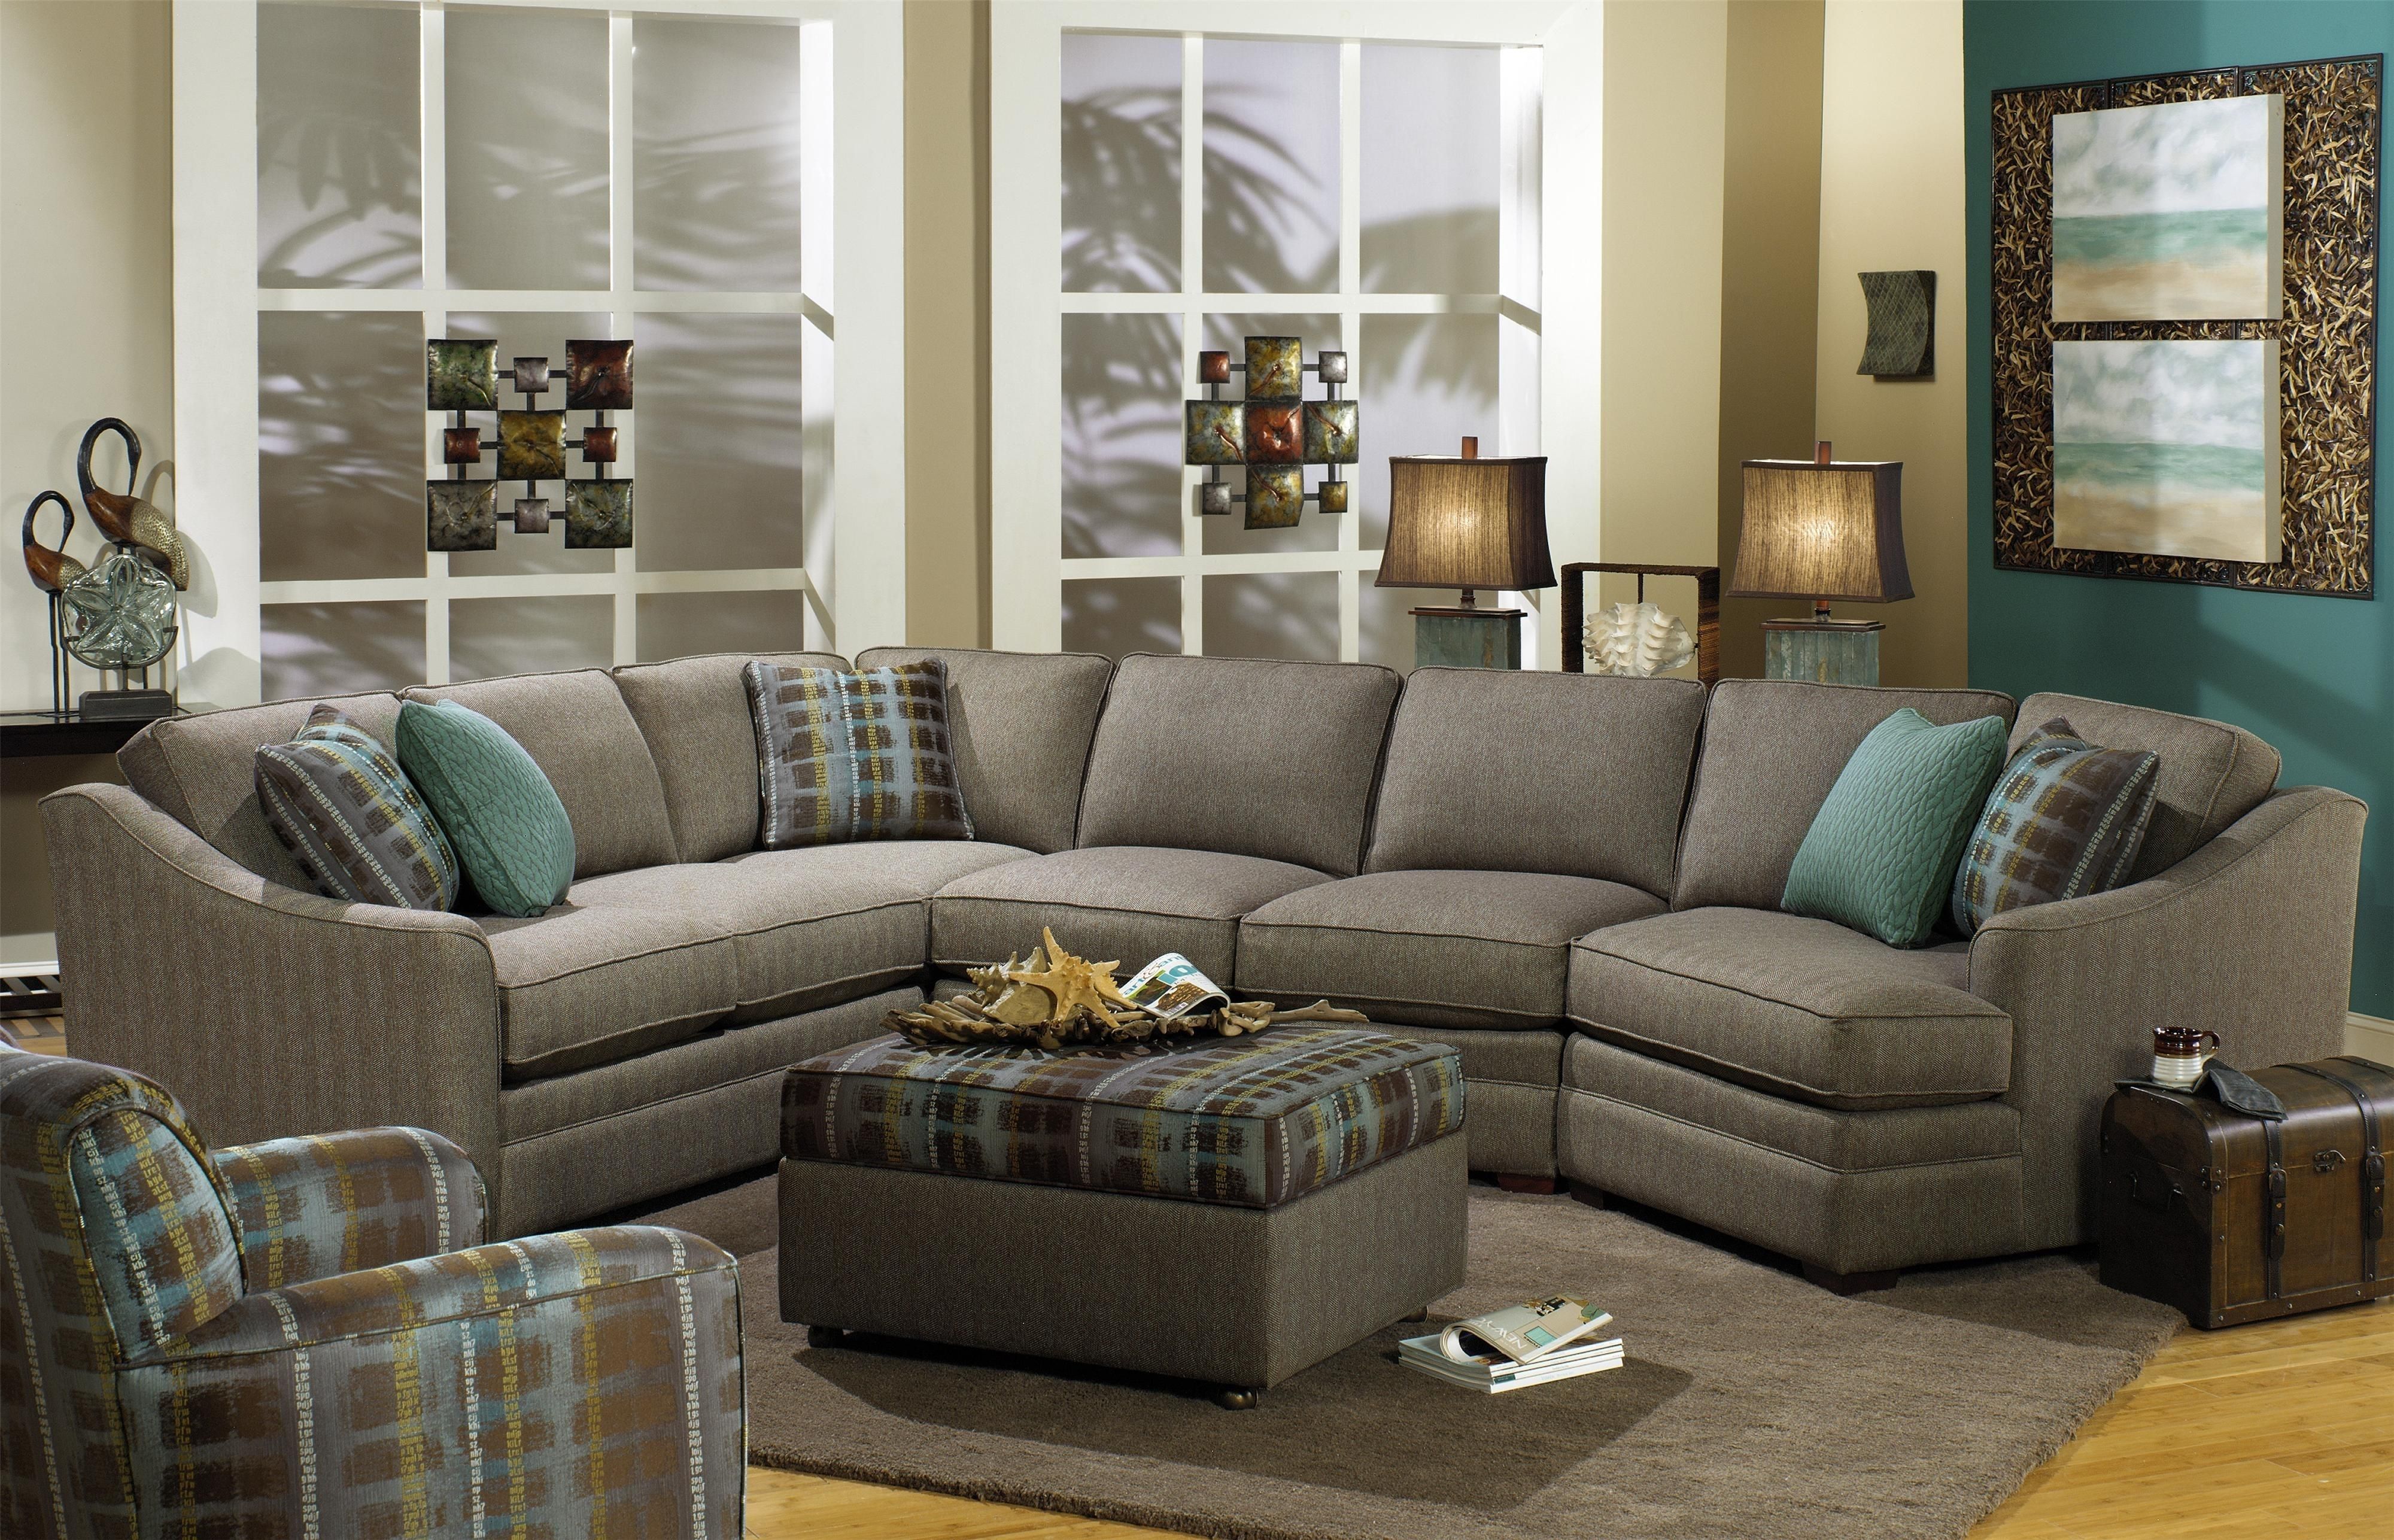 F9 Custom Collection Customizable 3 Piece Sectional With Laf Cuddler Regarding Killeen Tx Sectional Sofas (Photo 10 of 10)